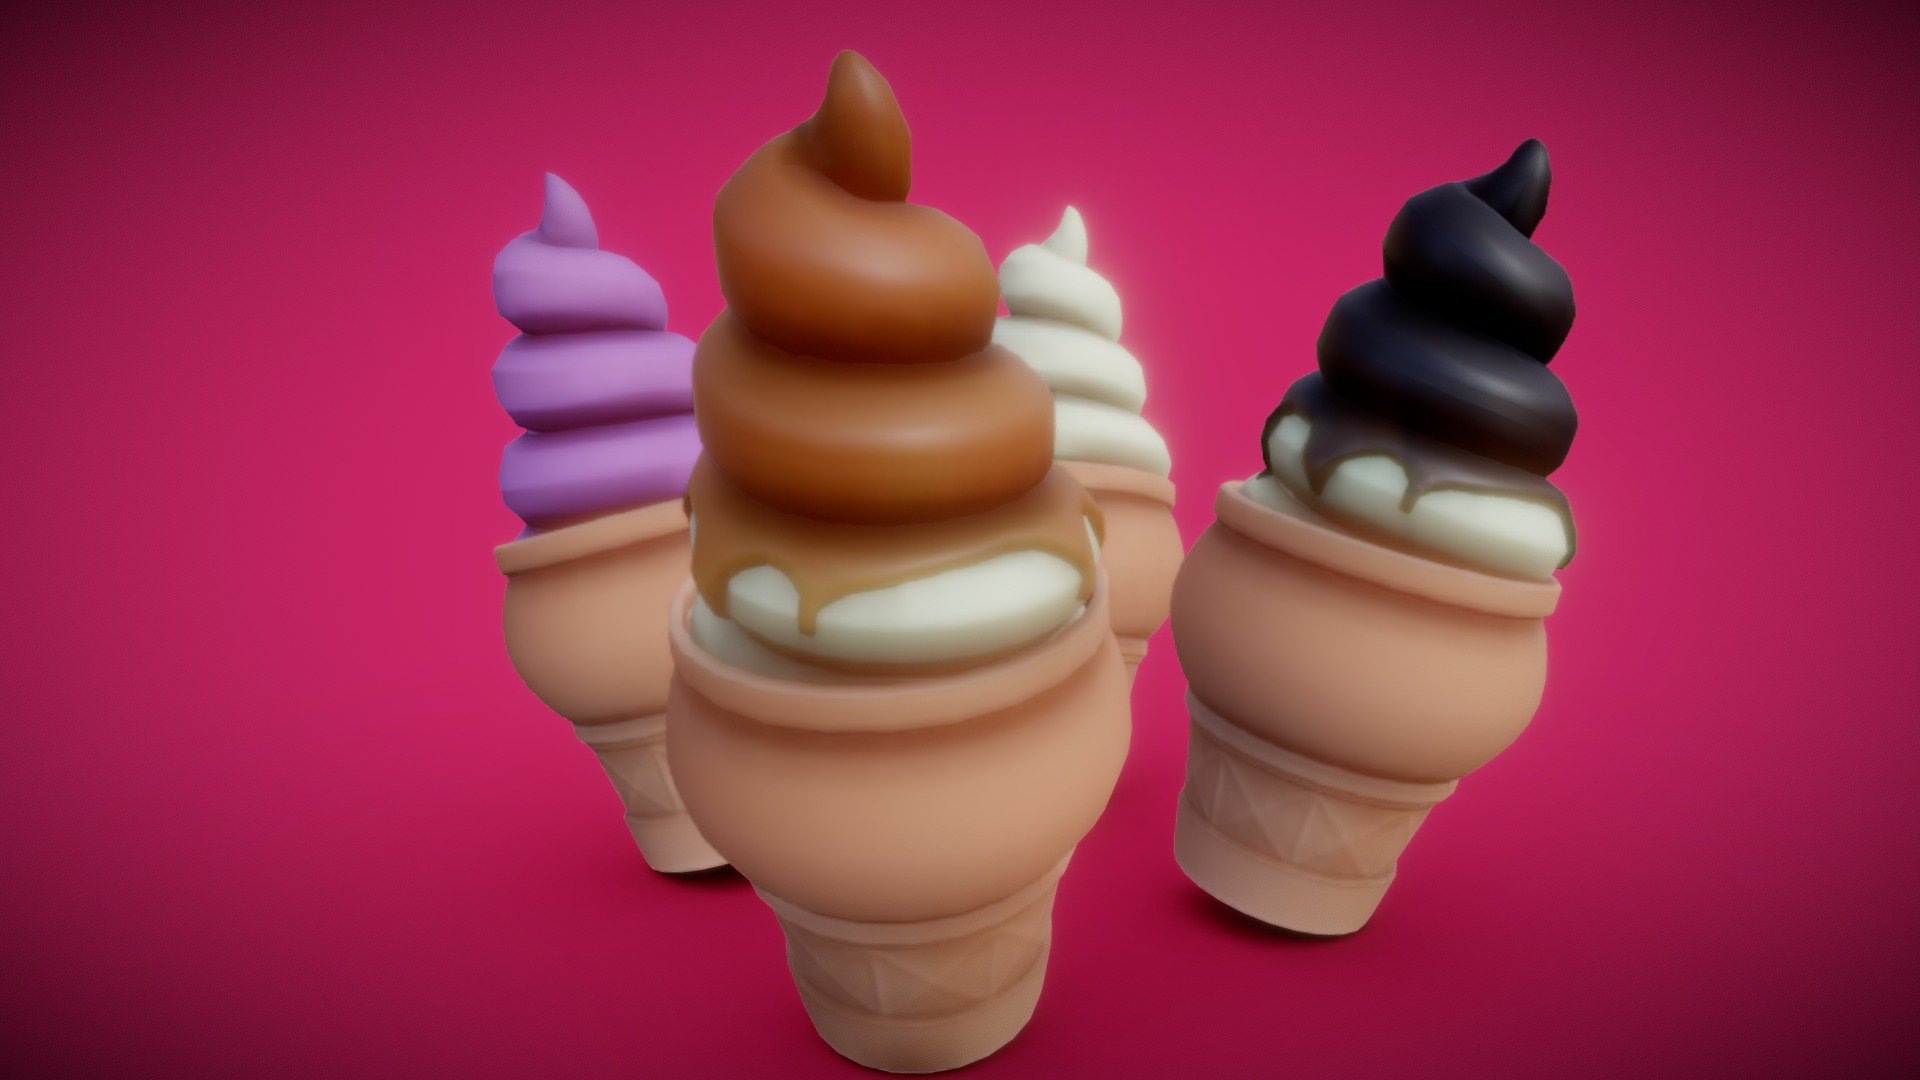 Modeled in 3DS Max/Zbrush, textured in Substance Painter/Photoshop.
The regulat ice cream model (without dip; Vanilla and Strawberry) has 2075 polygons and the model with Dip (Chocolate and Caramel) has  4858 polygons.

Files included:
• Icecream_Regular_OBJ.obj (Inside the Icecream_OBJ-Files.rar)
• Icecream_With-Dip_OBJ.obj (Inside the Icecream_OBJ-Files.rar)
• Diffuse Map (2048x2048)
• Normals map (2048x2048)
• Ambient Oclusion map (2048x2048)
• Roughness map (2048x2048)
• Subssurface Scattering map (2048x2048) - Stylized Ice Cream Cones, Multiple Flavors 3d model